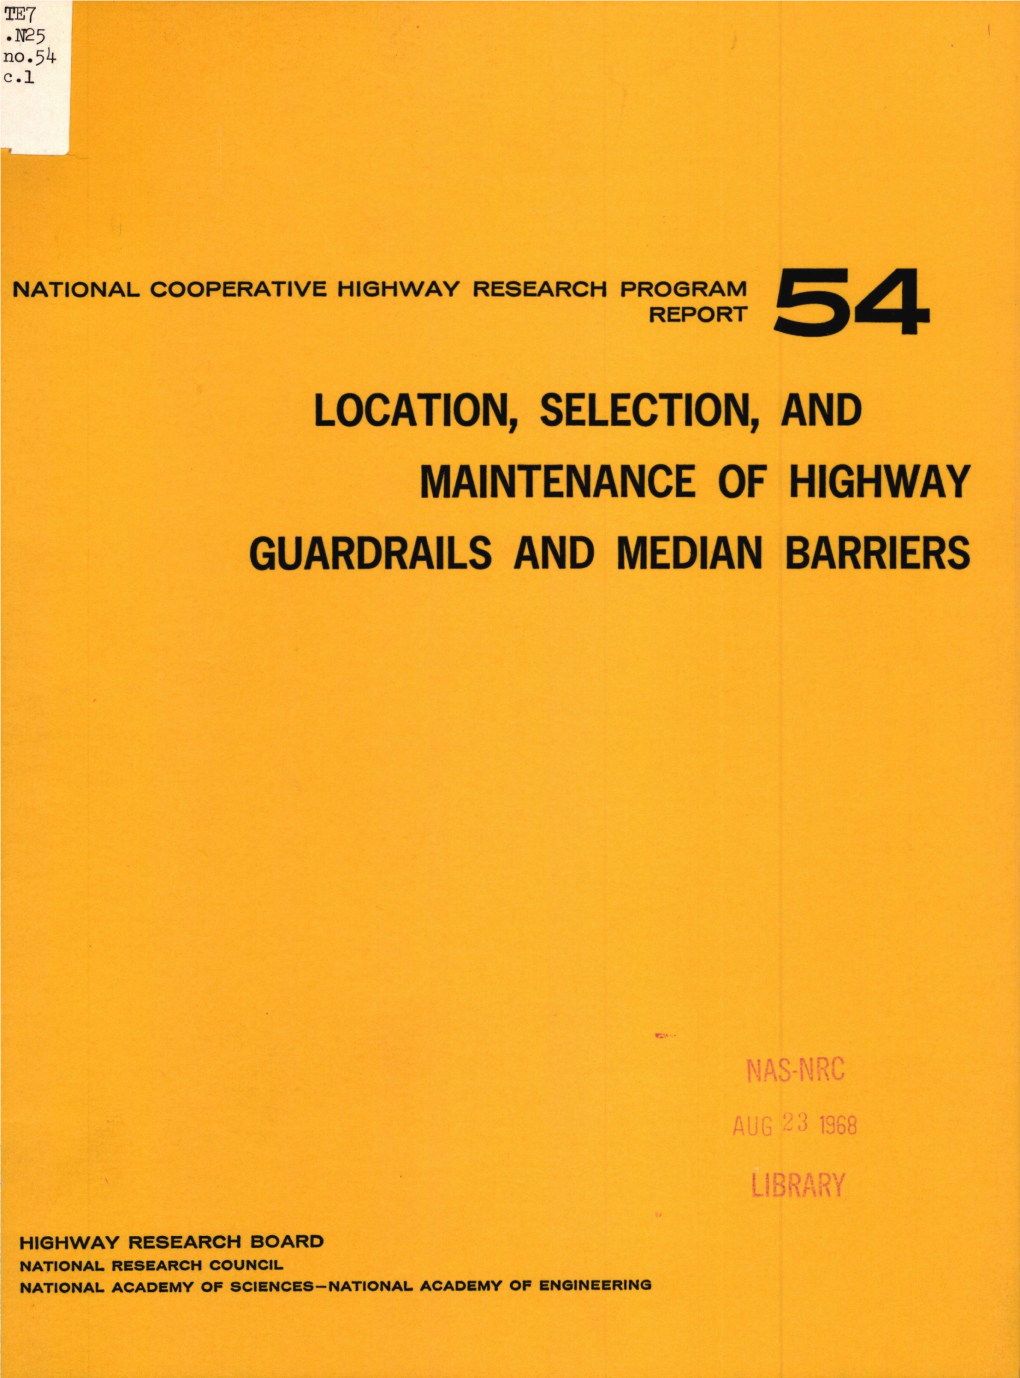 Location, Selection, and Maintenance of Highway Guardrails and Median Barriers